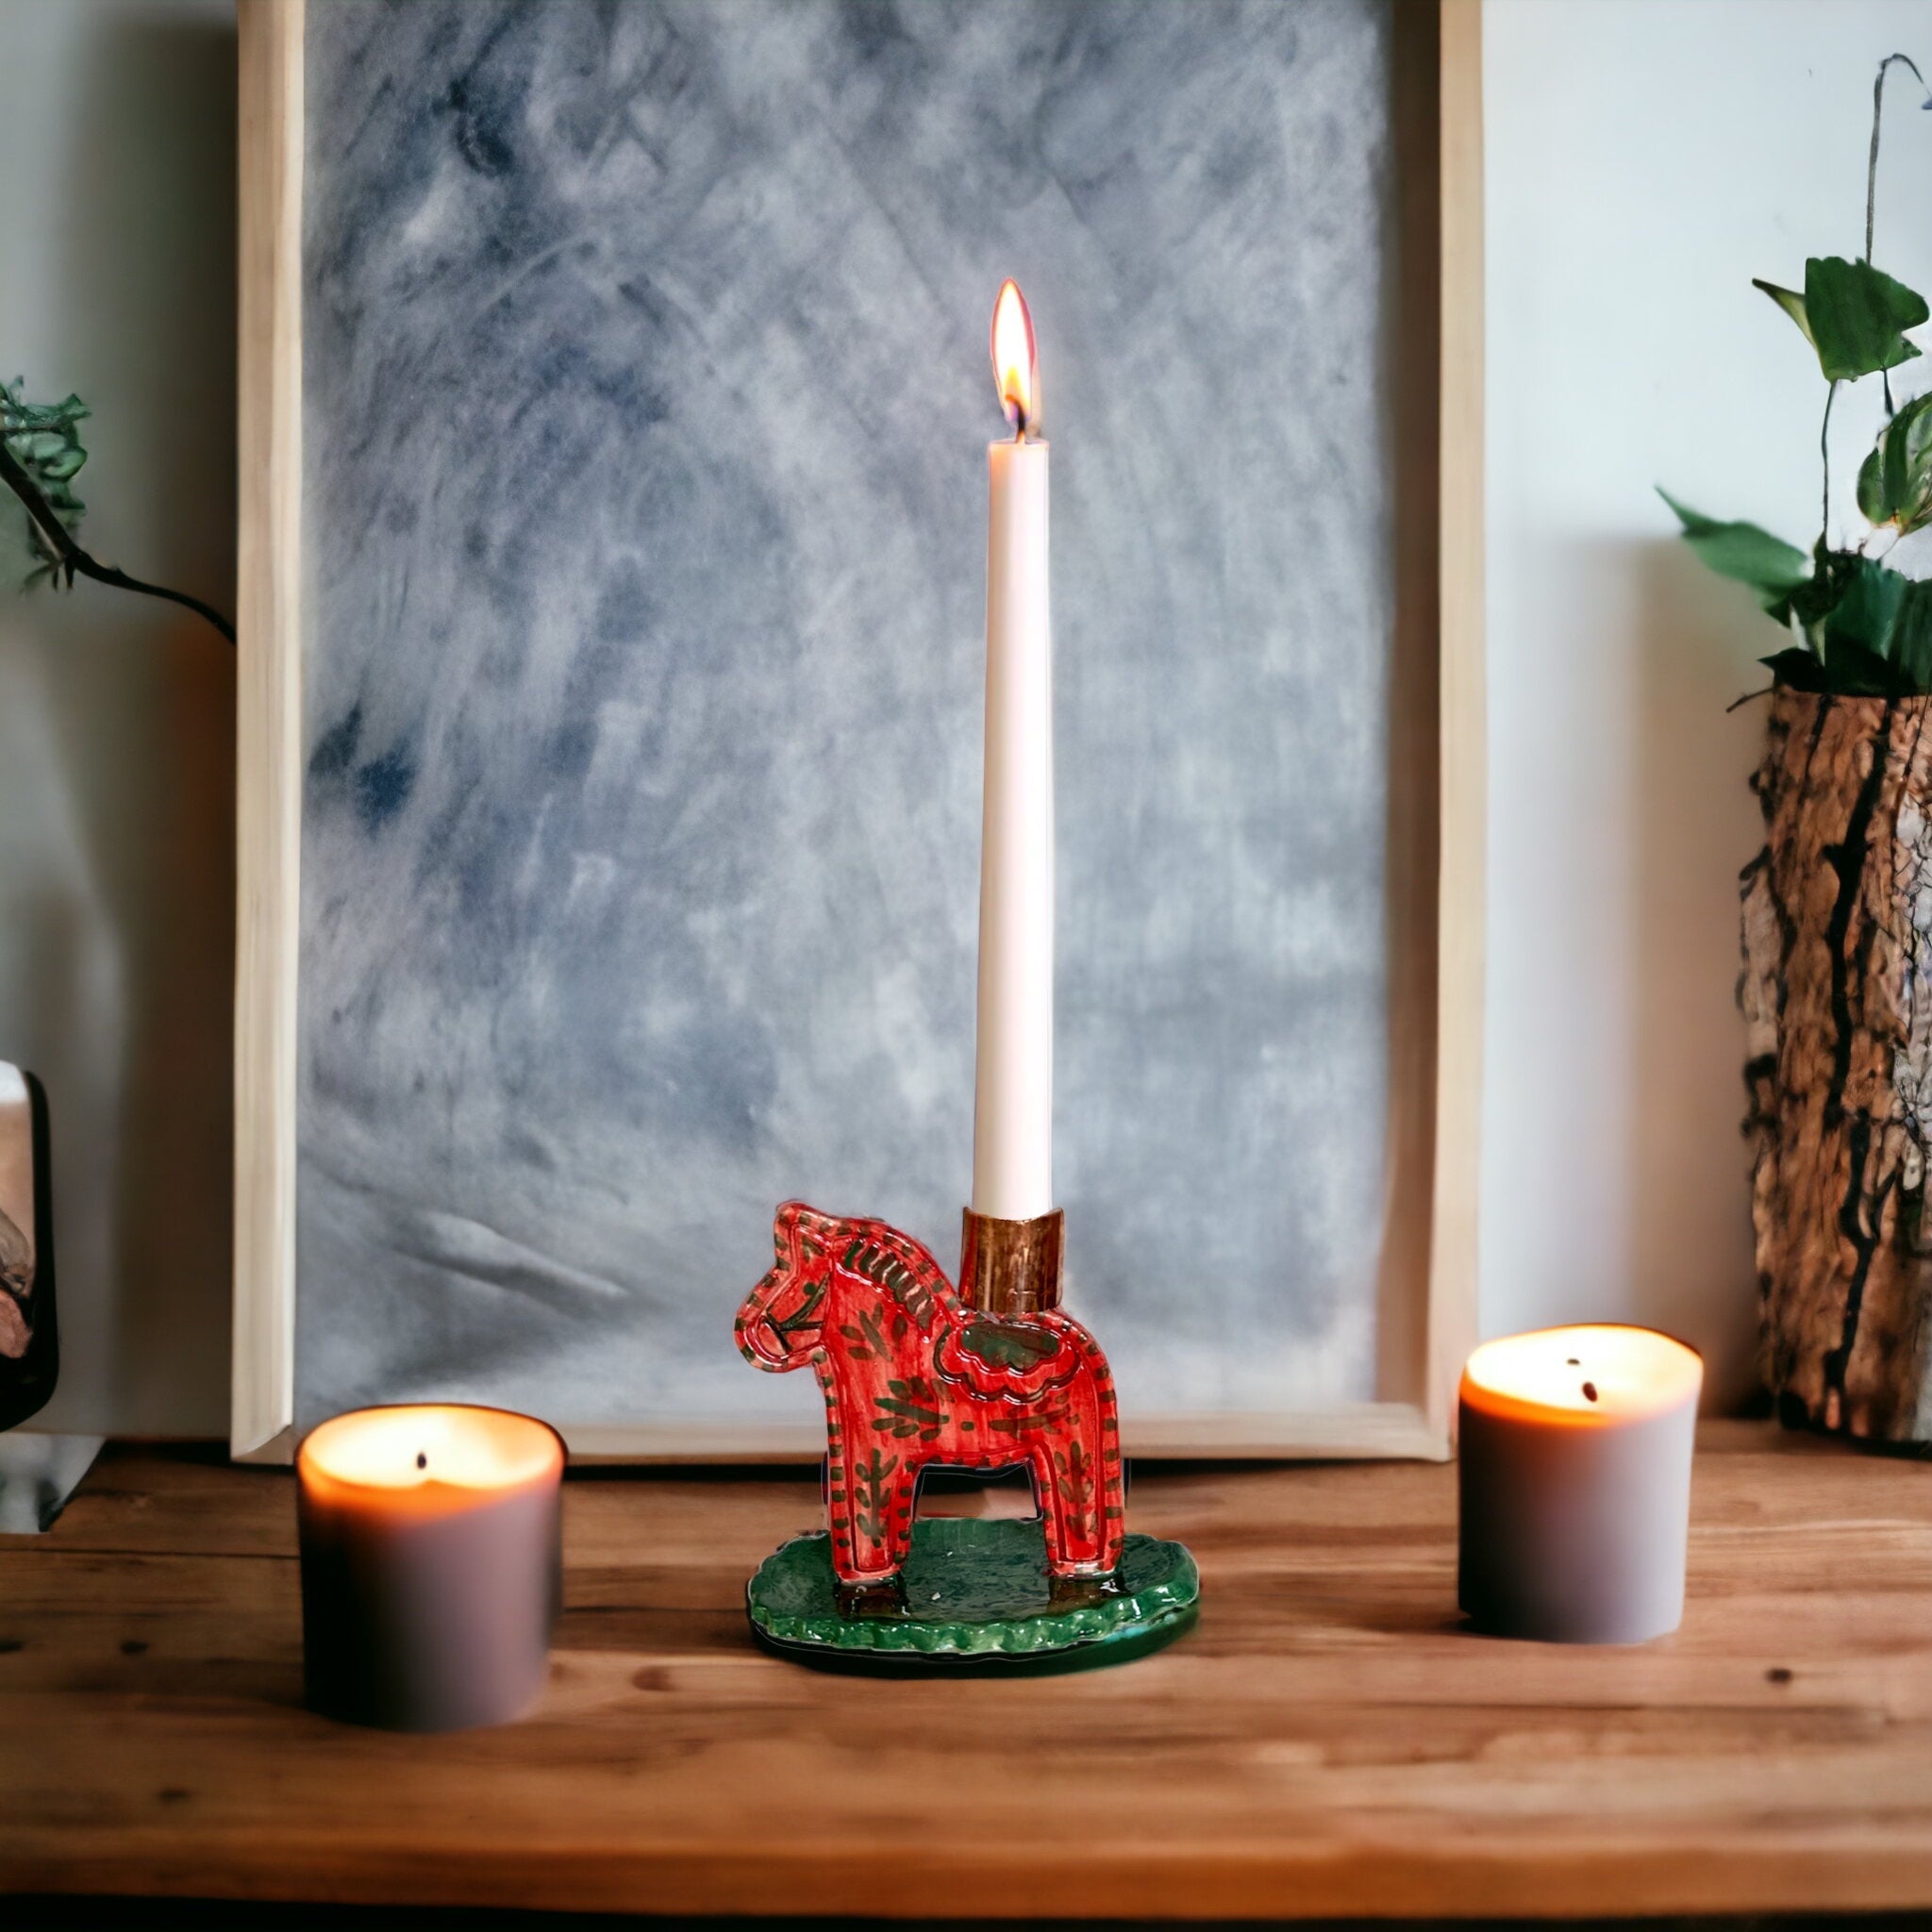 Horse Candlestick Holder - Premium Cake Topper from Tricia Lowenfield Design 